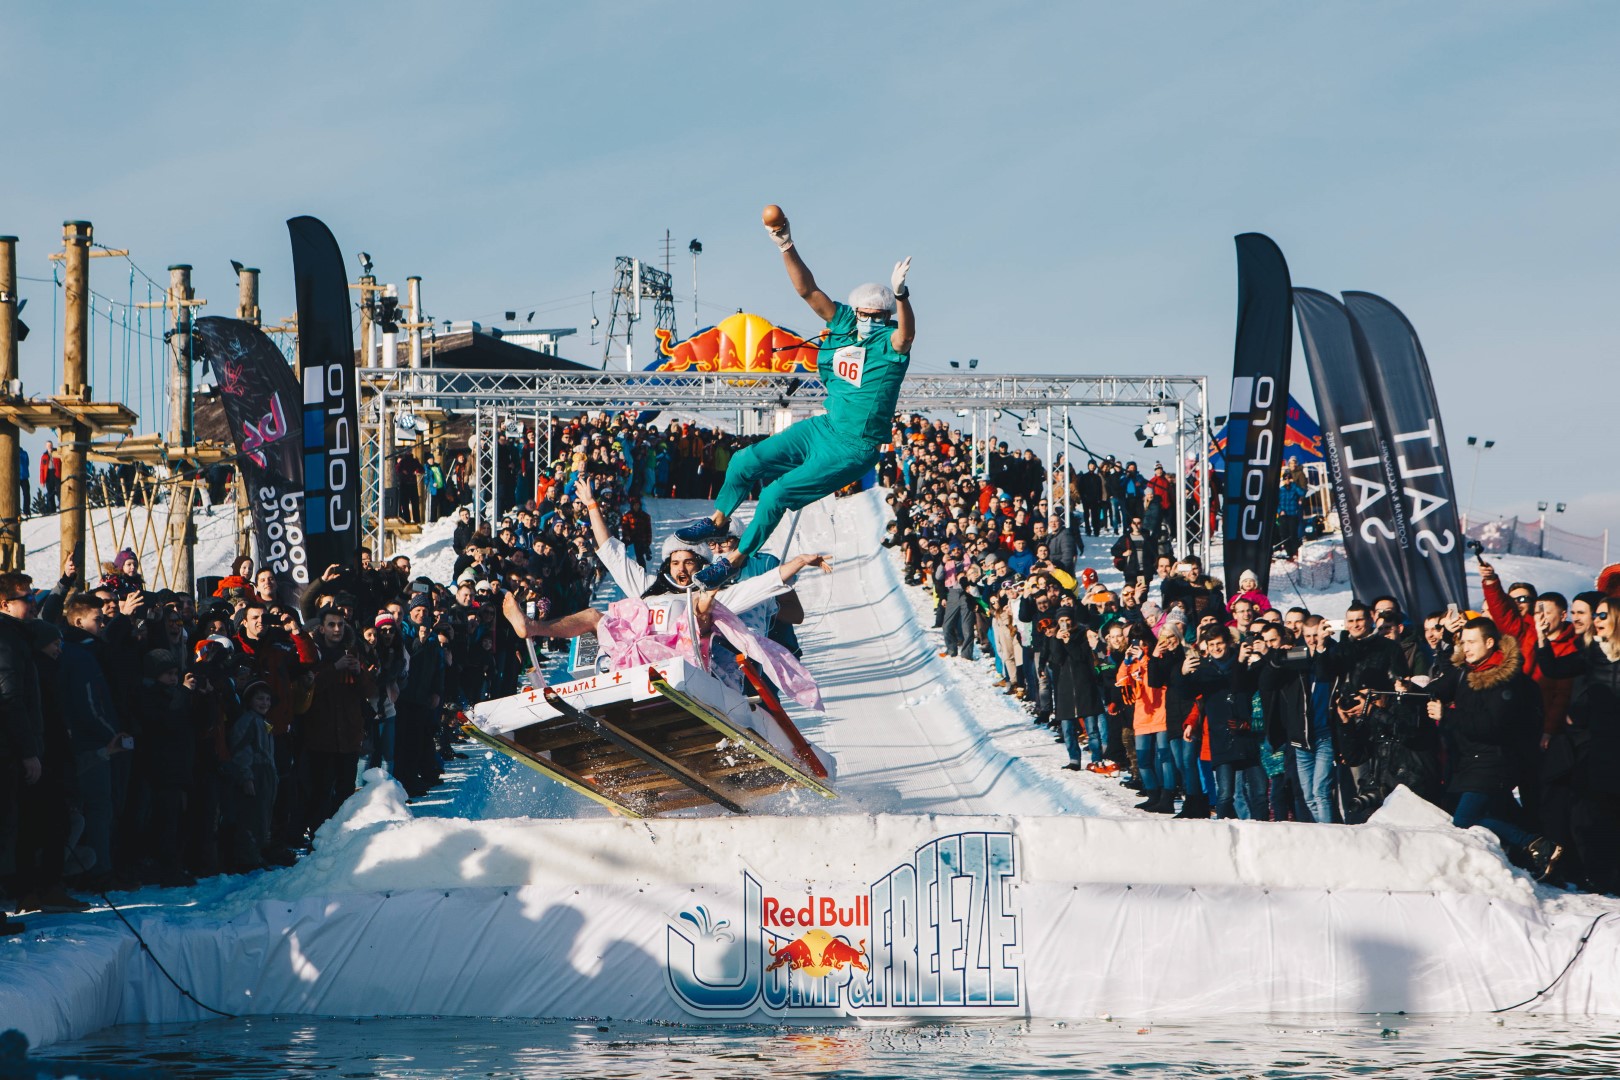 Participants perform during Red Bull Jump & Freeze in Vilnius, Lithuania on February 4, 2017 // Giedrius Bubliauskas / Red Bull Content Pool // SI201702060009 // Usage for editorial use only //